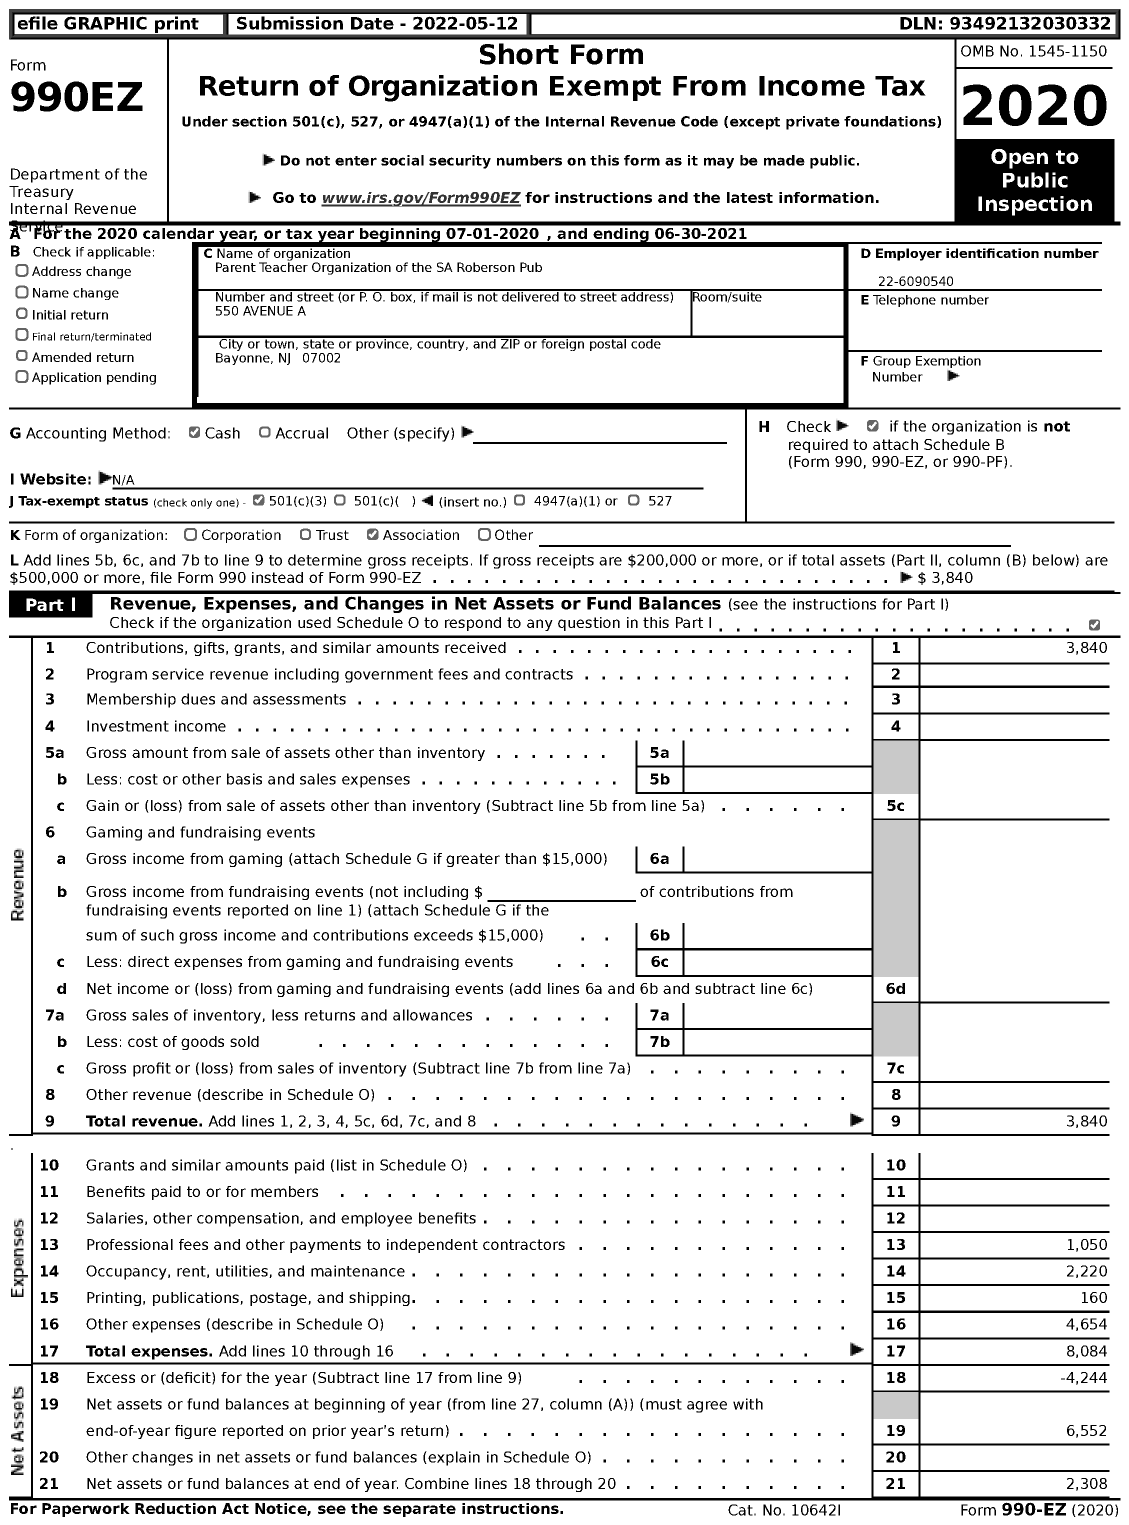 Image of first page of 2020 Form 990EZ for Parent Teacher Organization of the SA Roberson Pub